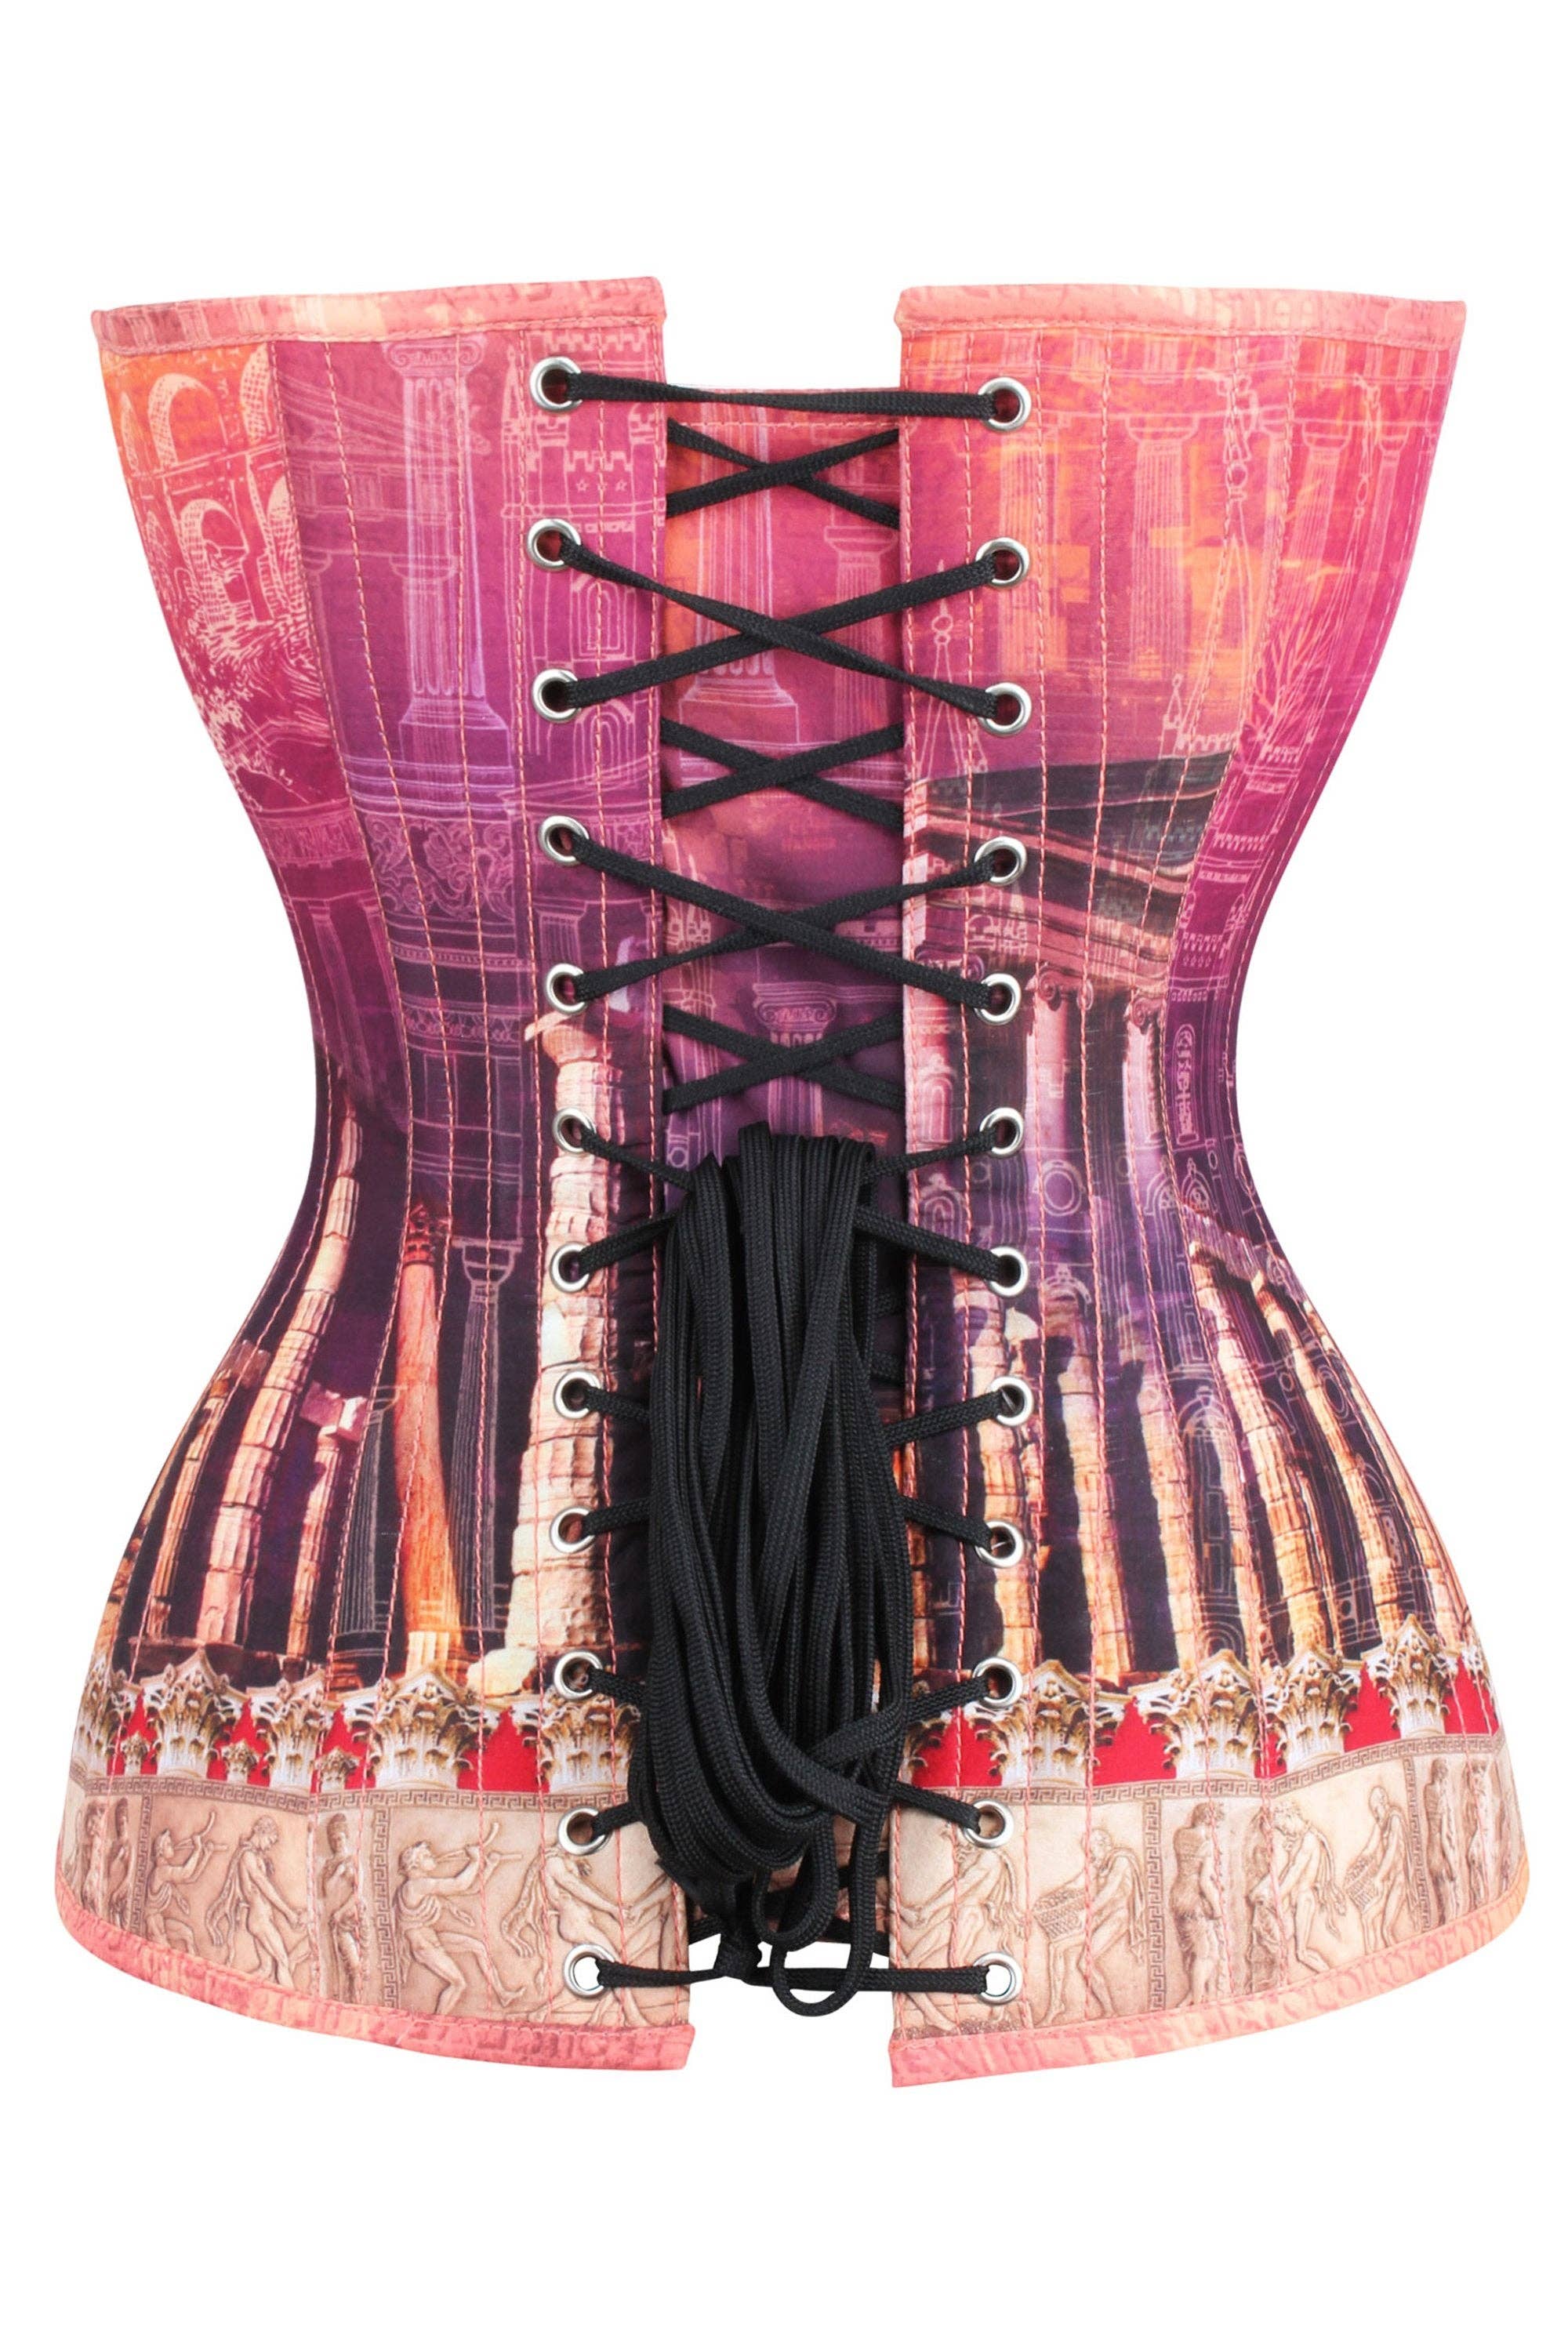 Corset Story - ARCHITECTURAL PRINT WAIST TAMING CORSET: 36" Corset (Suitable for 39-40" Natural Waist)